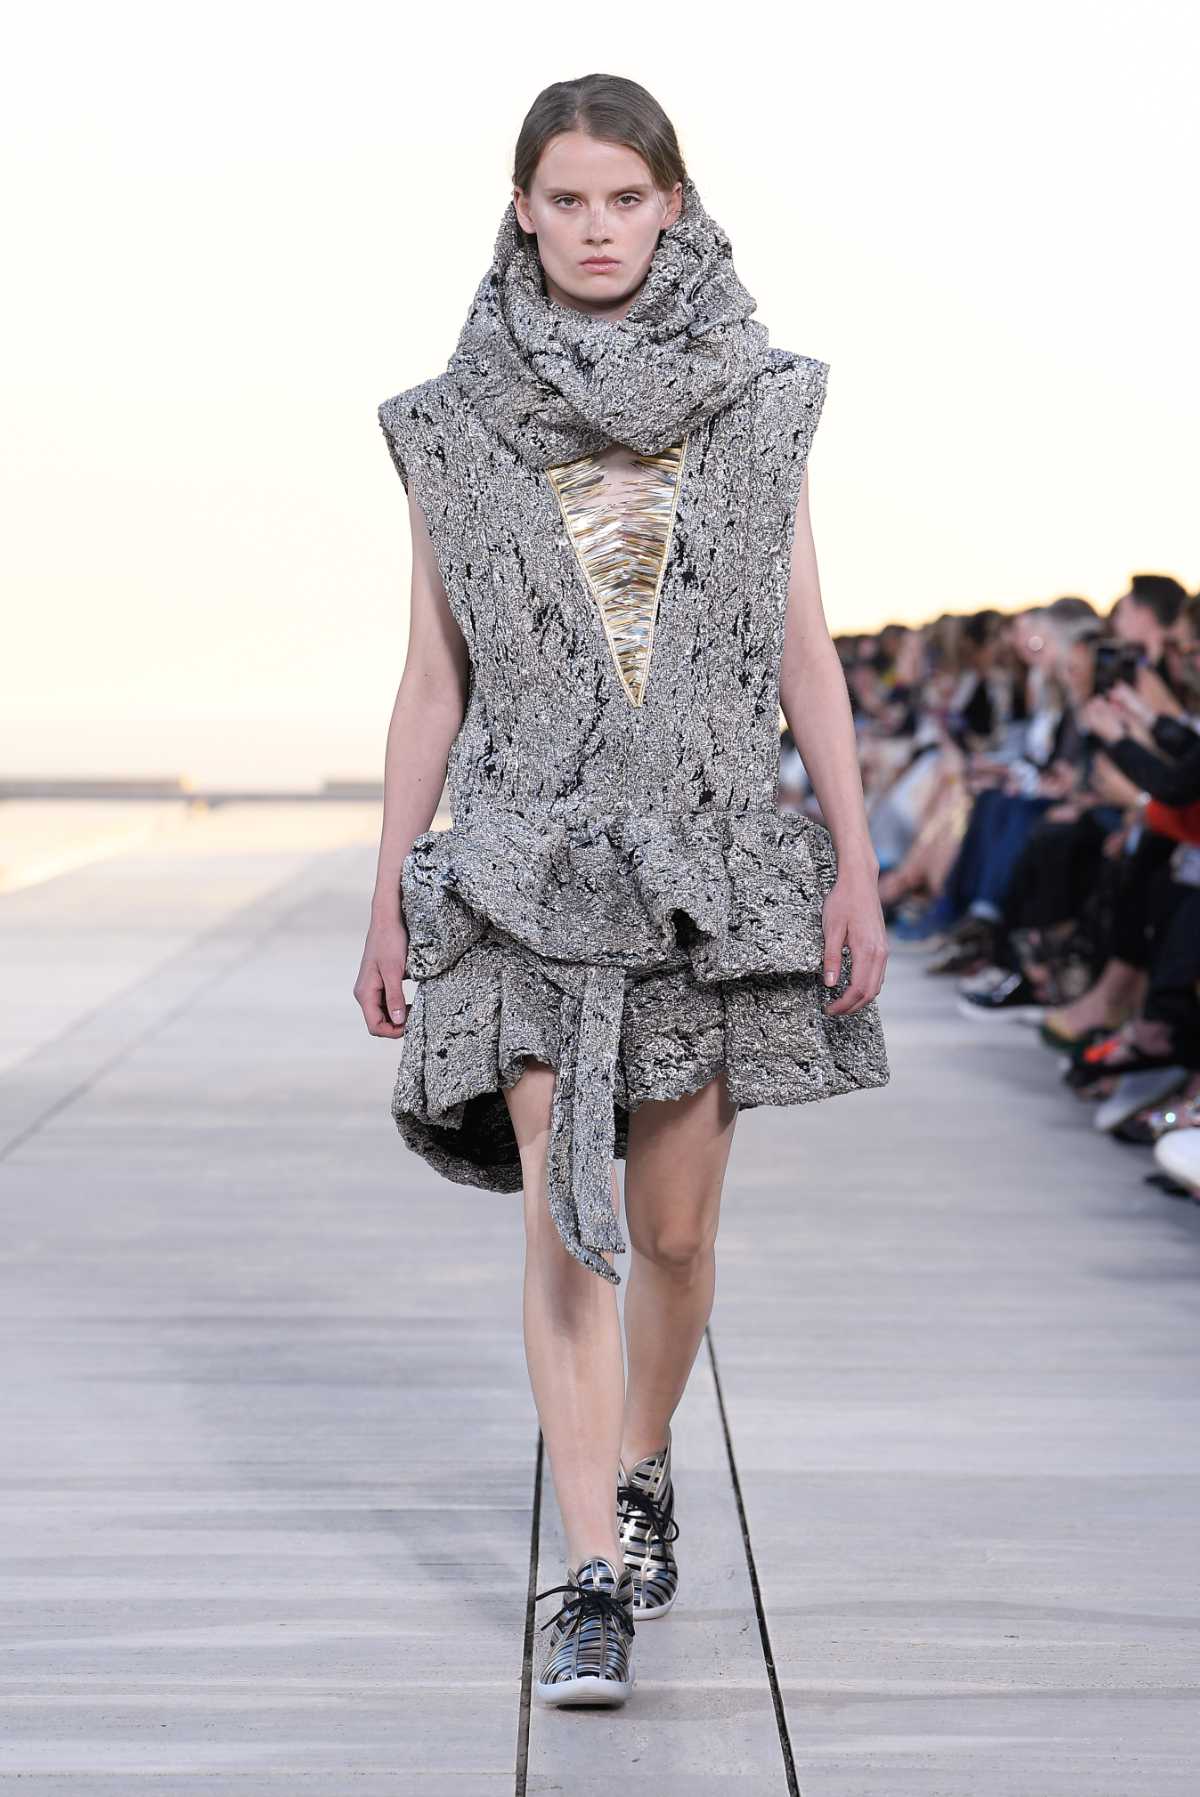 Louis Vuitton Presents Its New Cruise 2023 Women's Fashion Show Collection